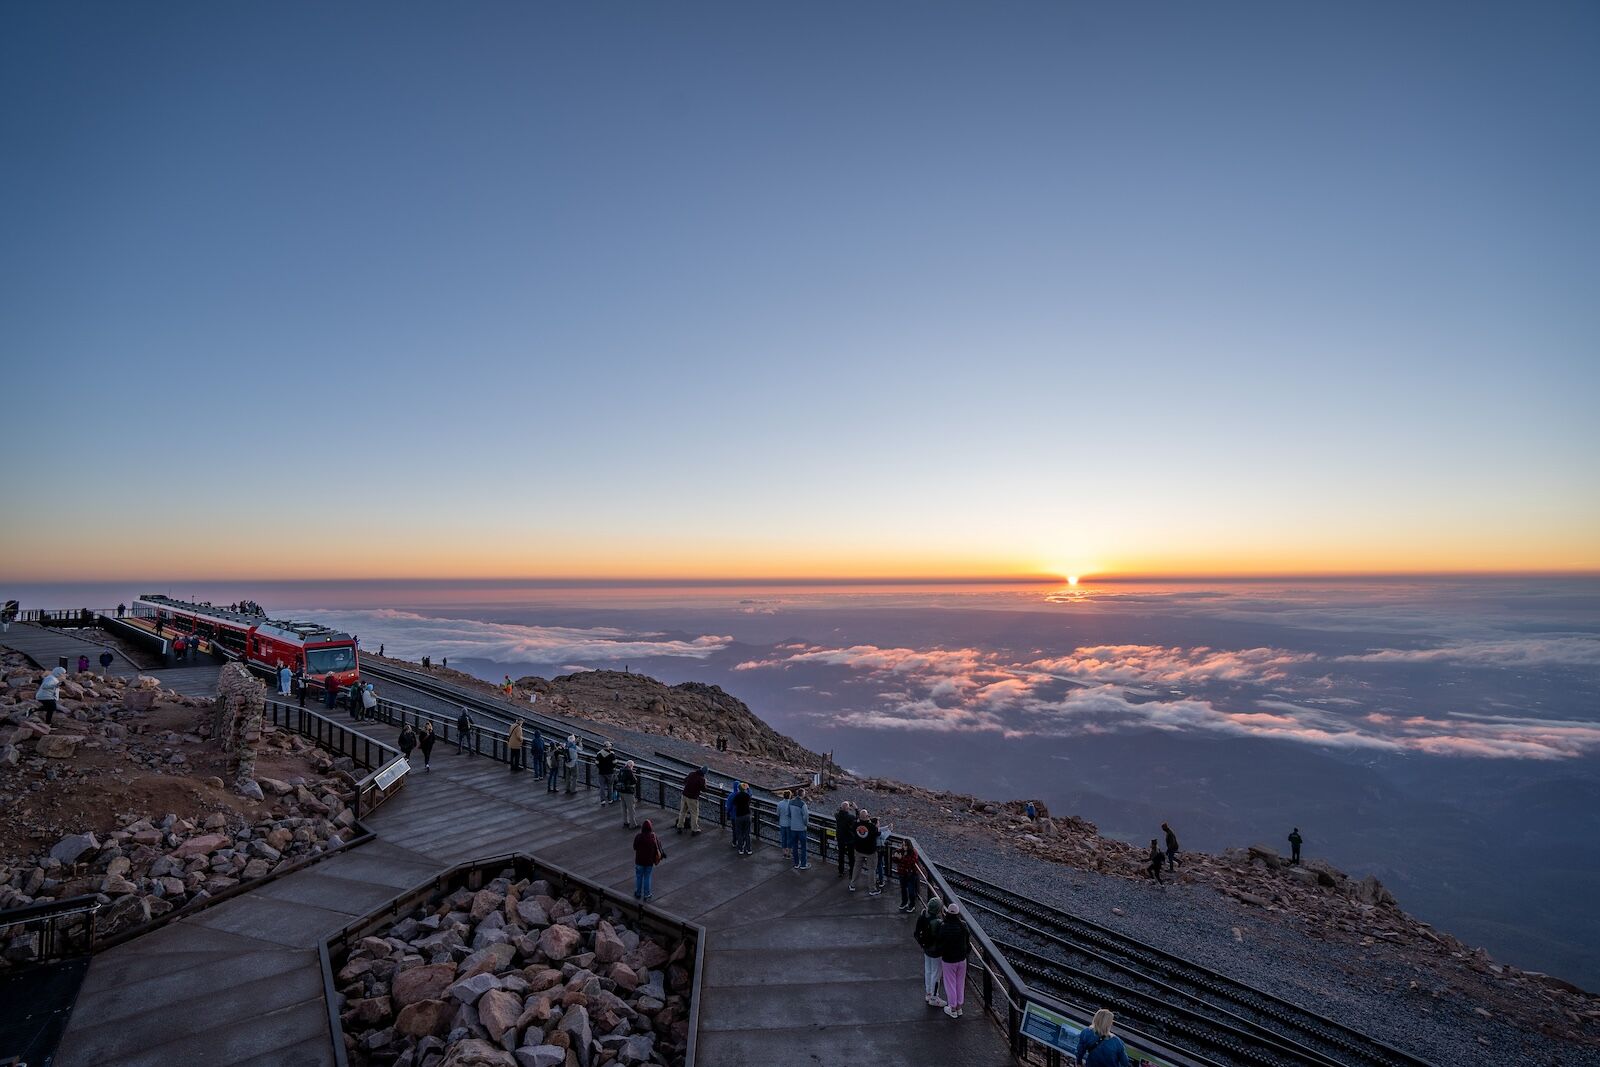 Broadmoor Manitou & Pikes Peak Cog Railway train at the summit of Pikes Peak where the view of the sunrise is magnificent